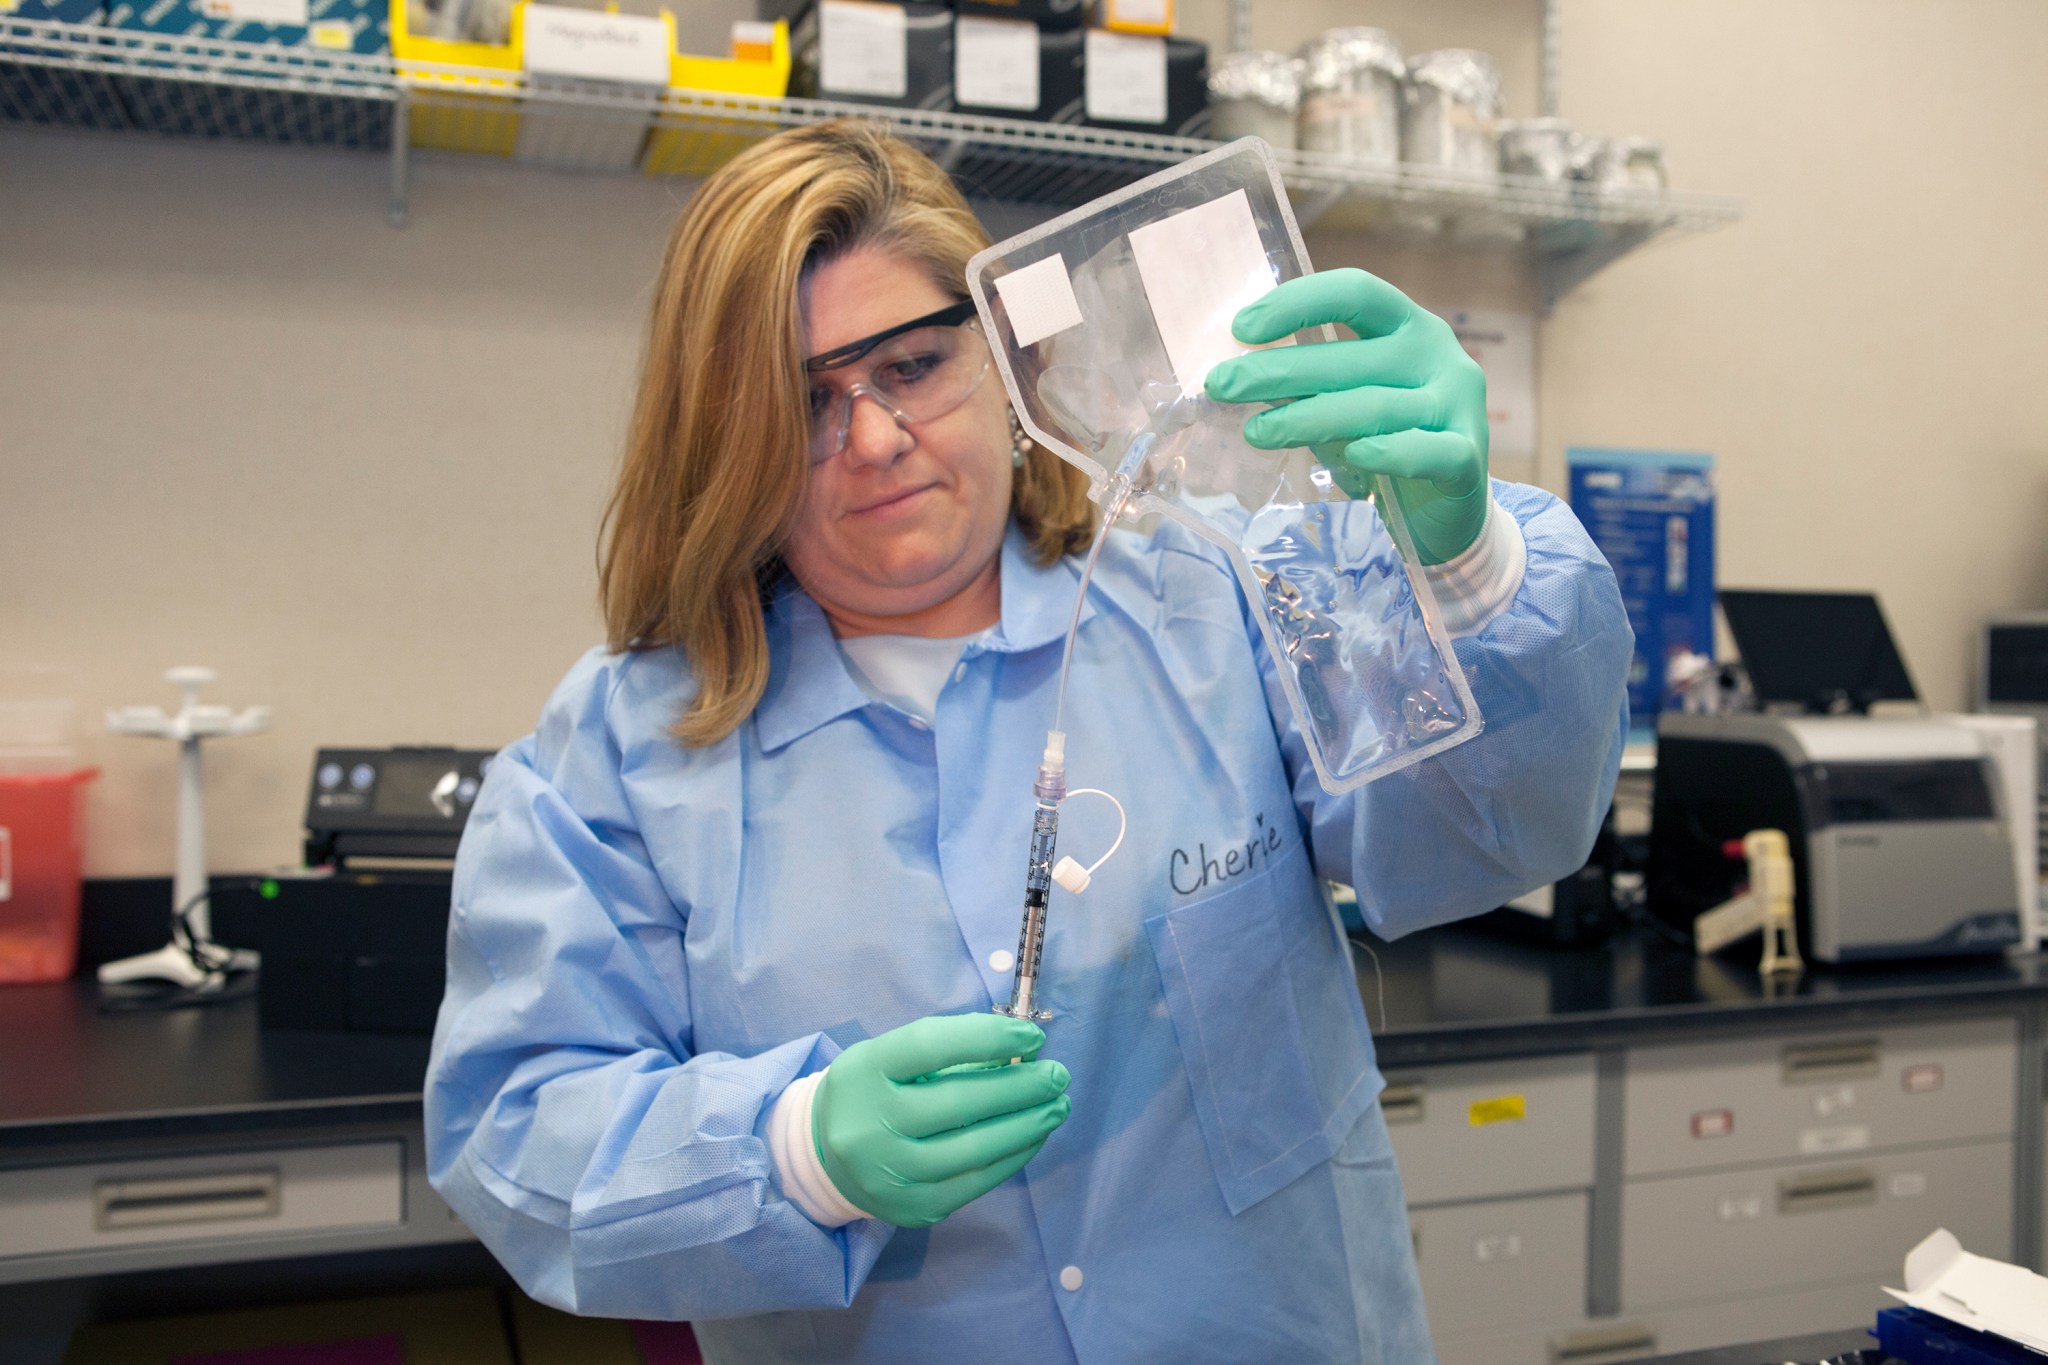 Cherie Oubre prepares a sample of water for testing in the RAZOR EX monitoring system.